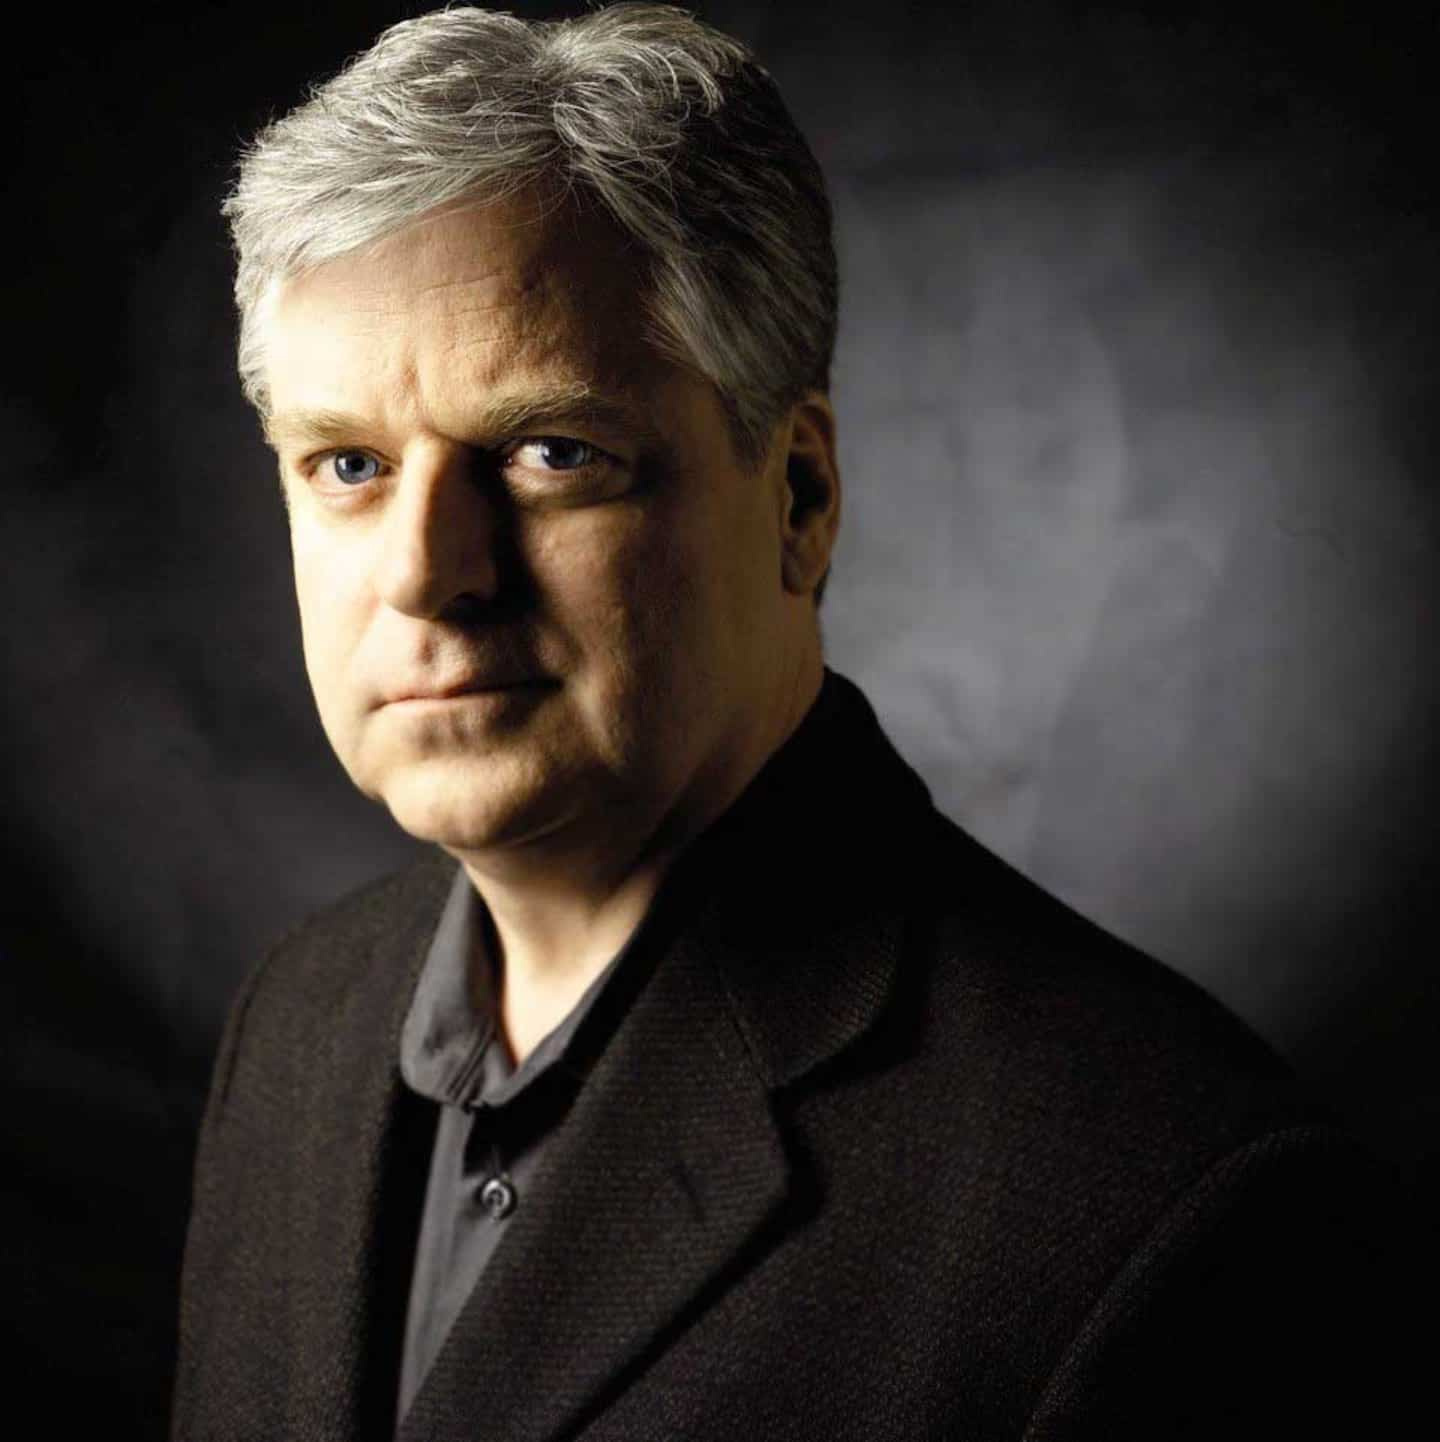 New novel by Linwood Barclay: when thriller rhymes with elevator